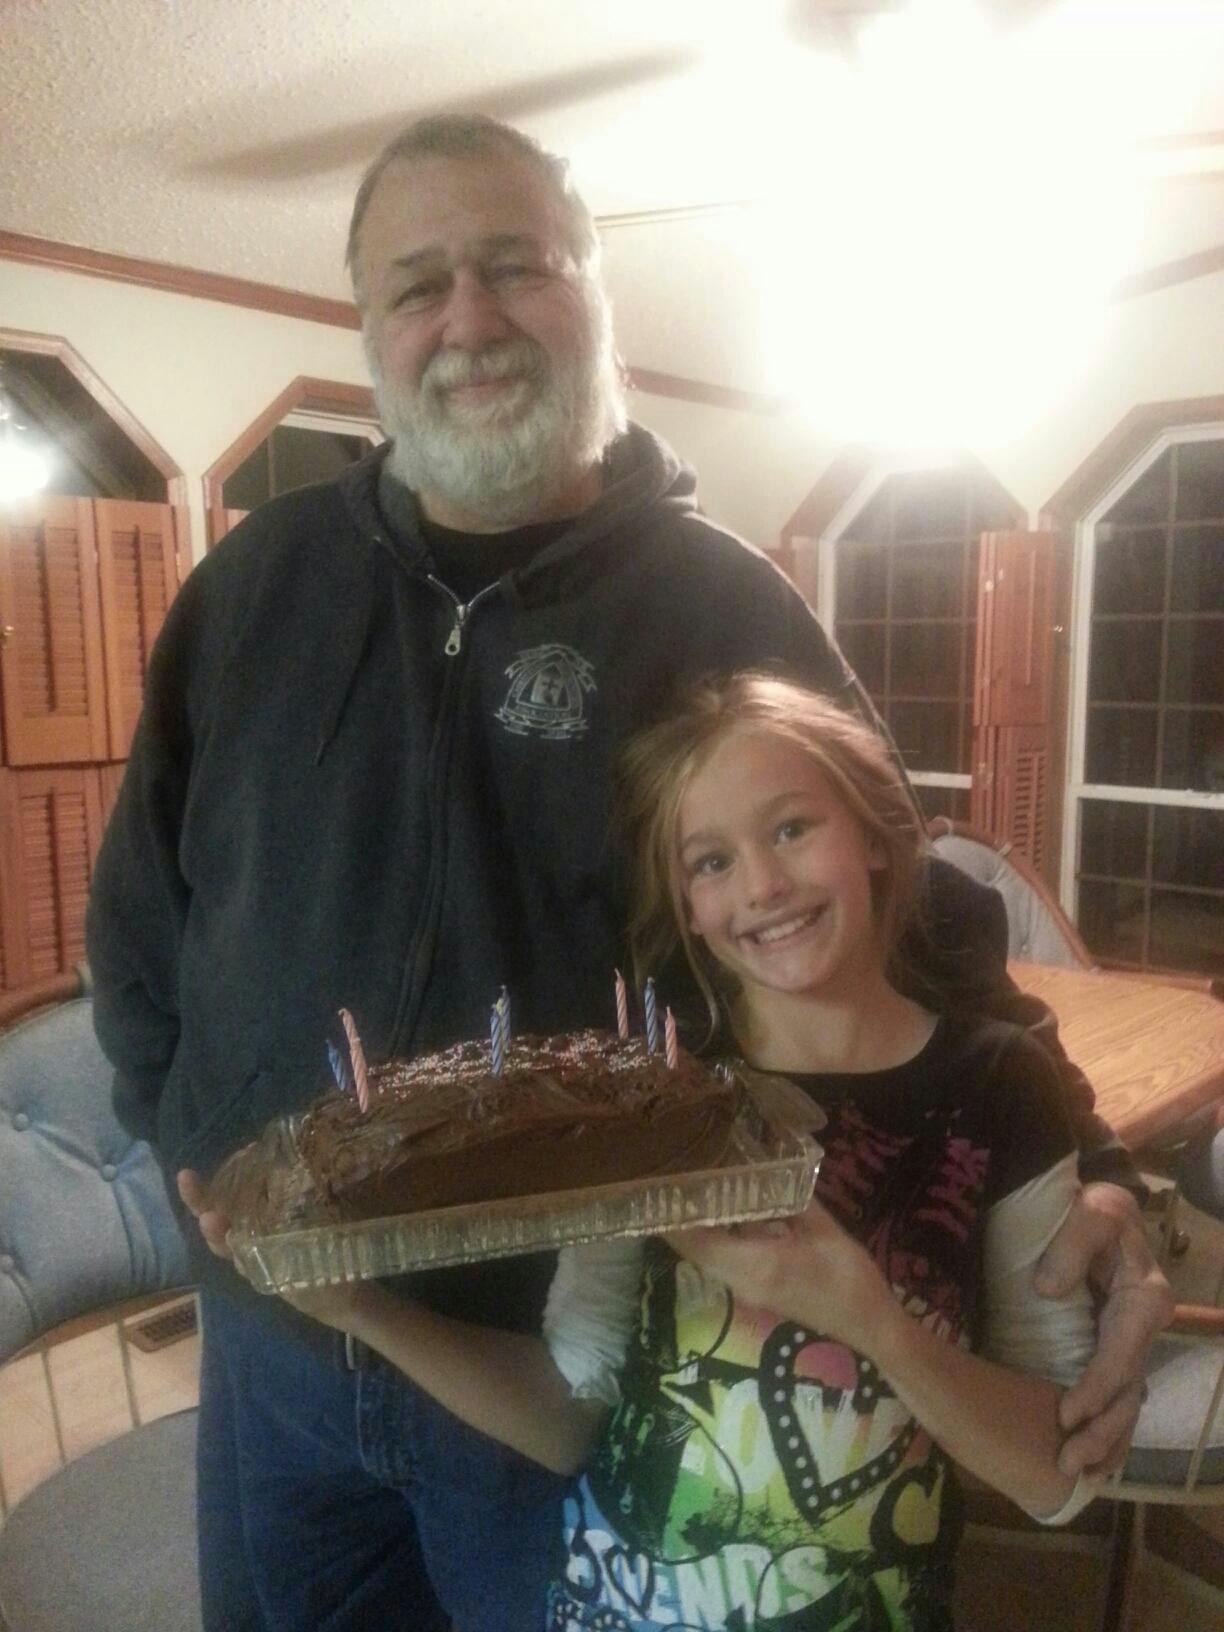 Papa and Paige- she baked him a cake from scratch with Ivan for his birthday, he had the biggest smile, he was so proud of her.